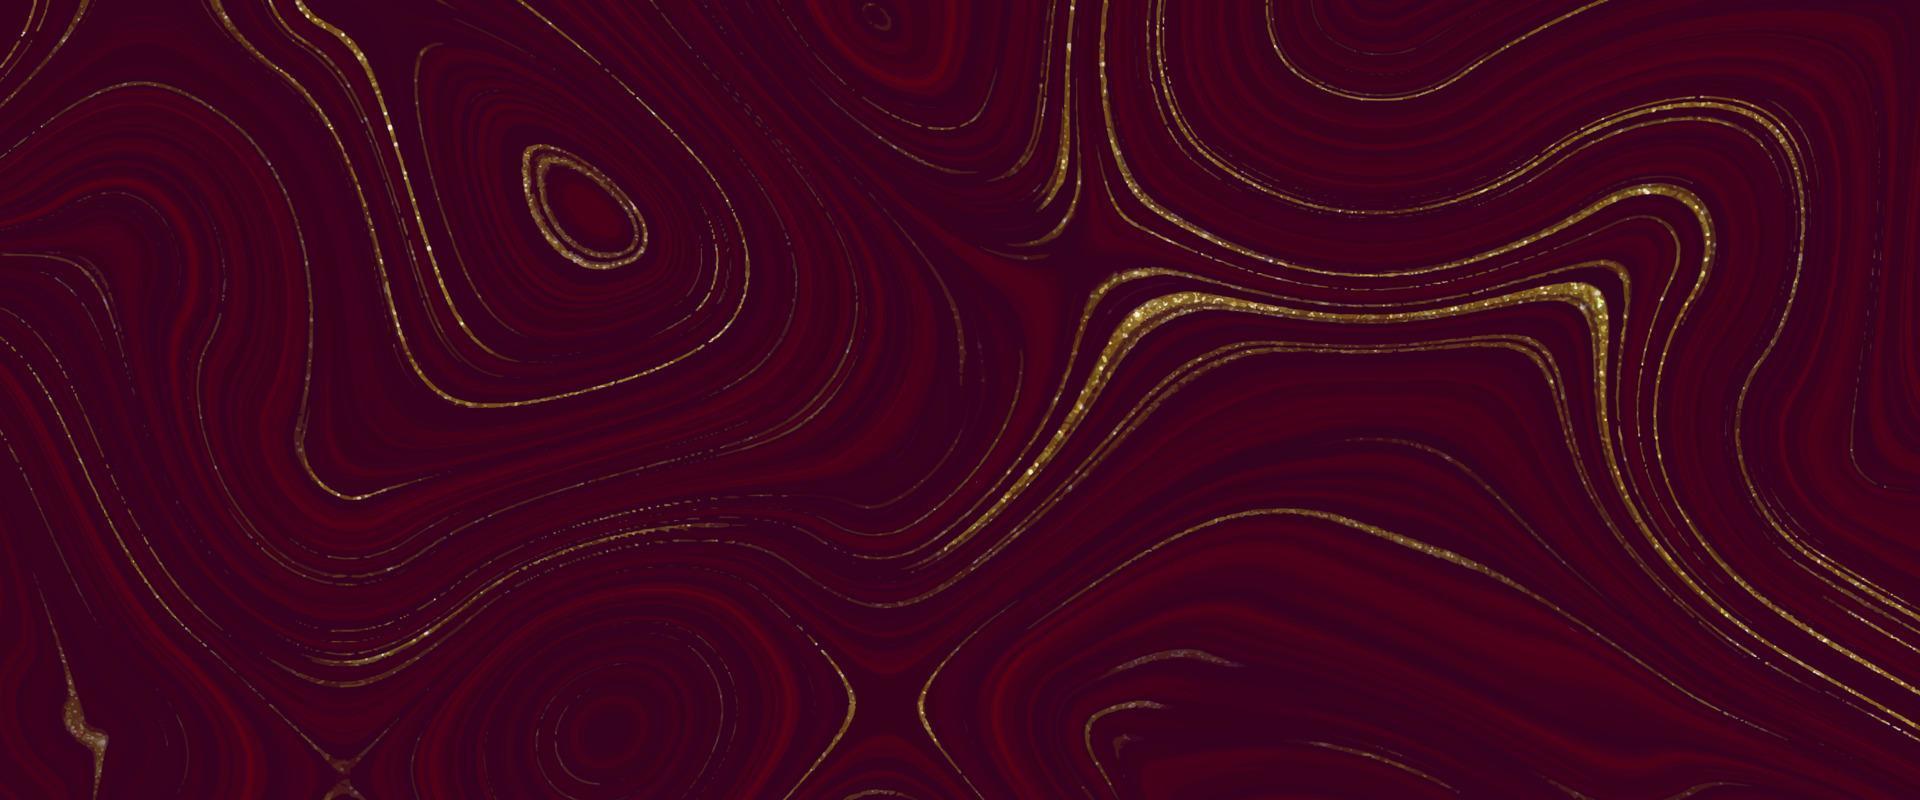 Golden luxury liquify background. Colorful liquid texture with gold and dark red glitter. Marble texture. Beautiful drawing with the divorces and wavy lines in gray tones. gold metallic surface. vector